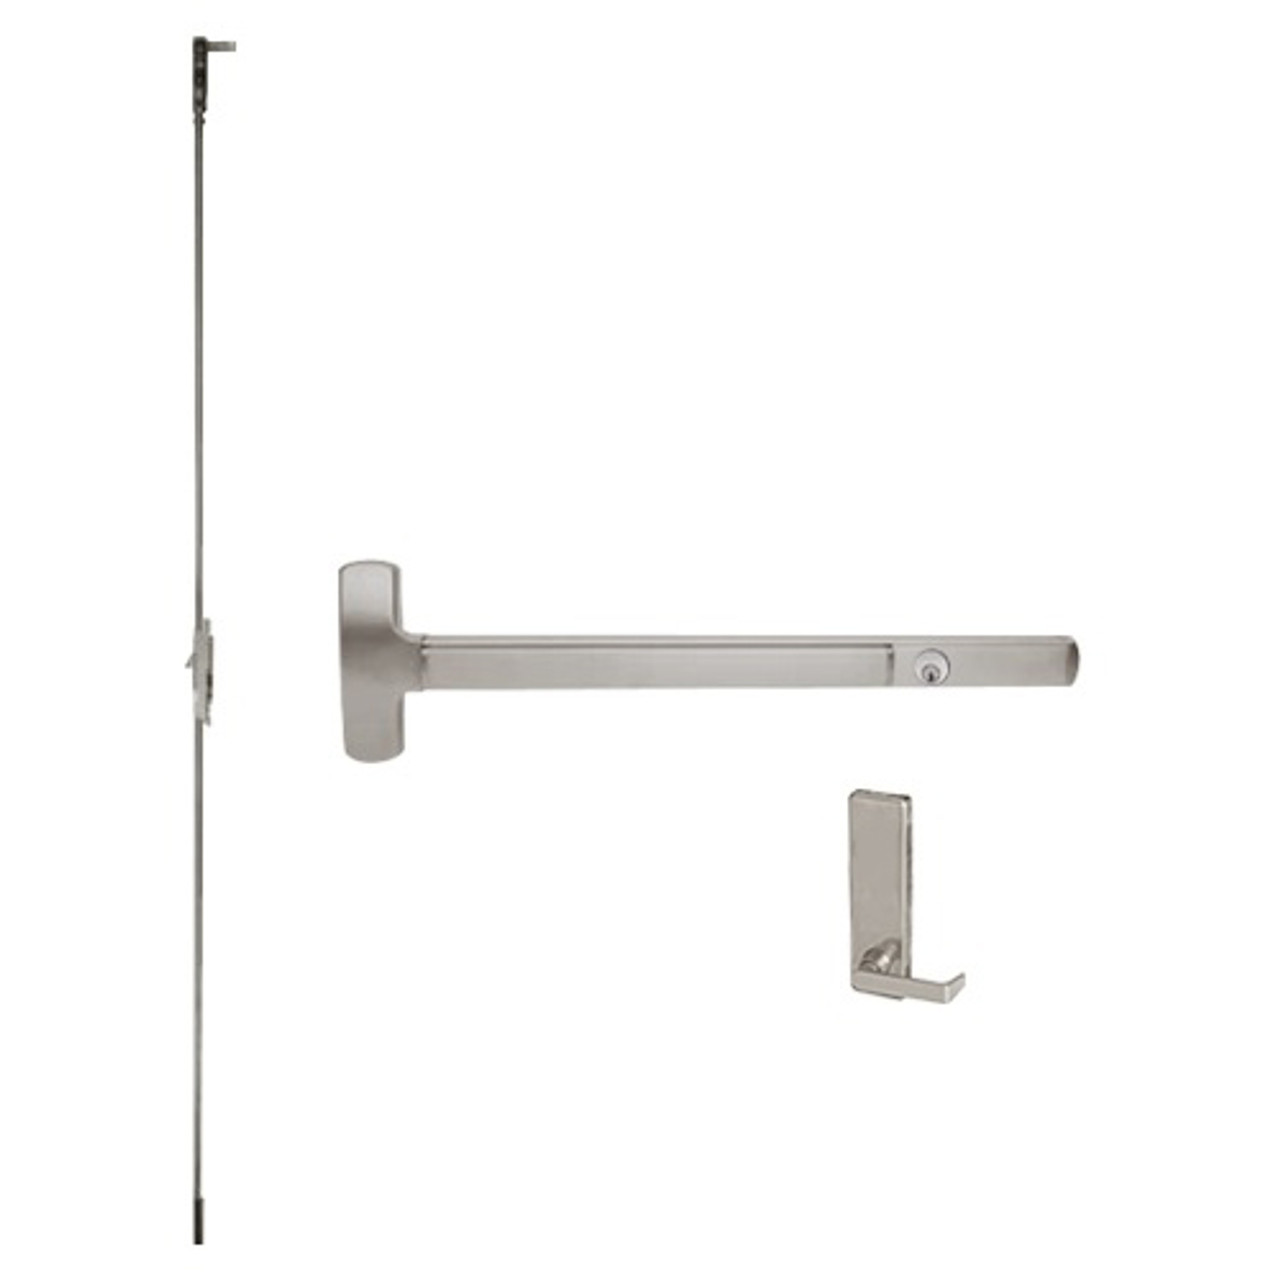 CD25-C-L-DT-DANE-US32D-2-RHR Falcon Exit Device in Satin Stainless Steel